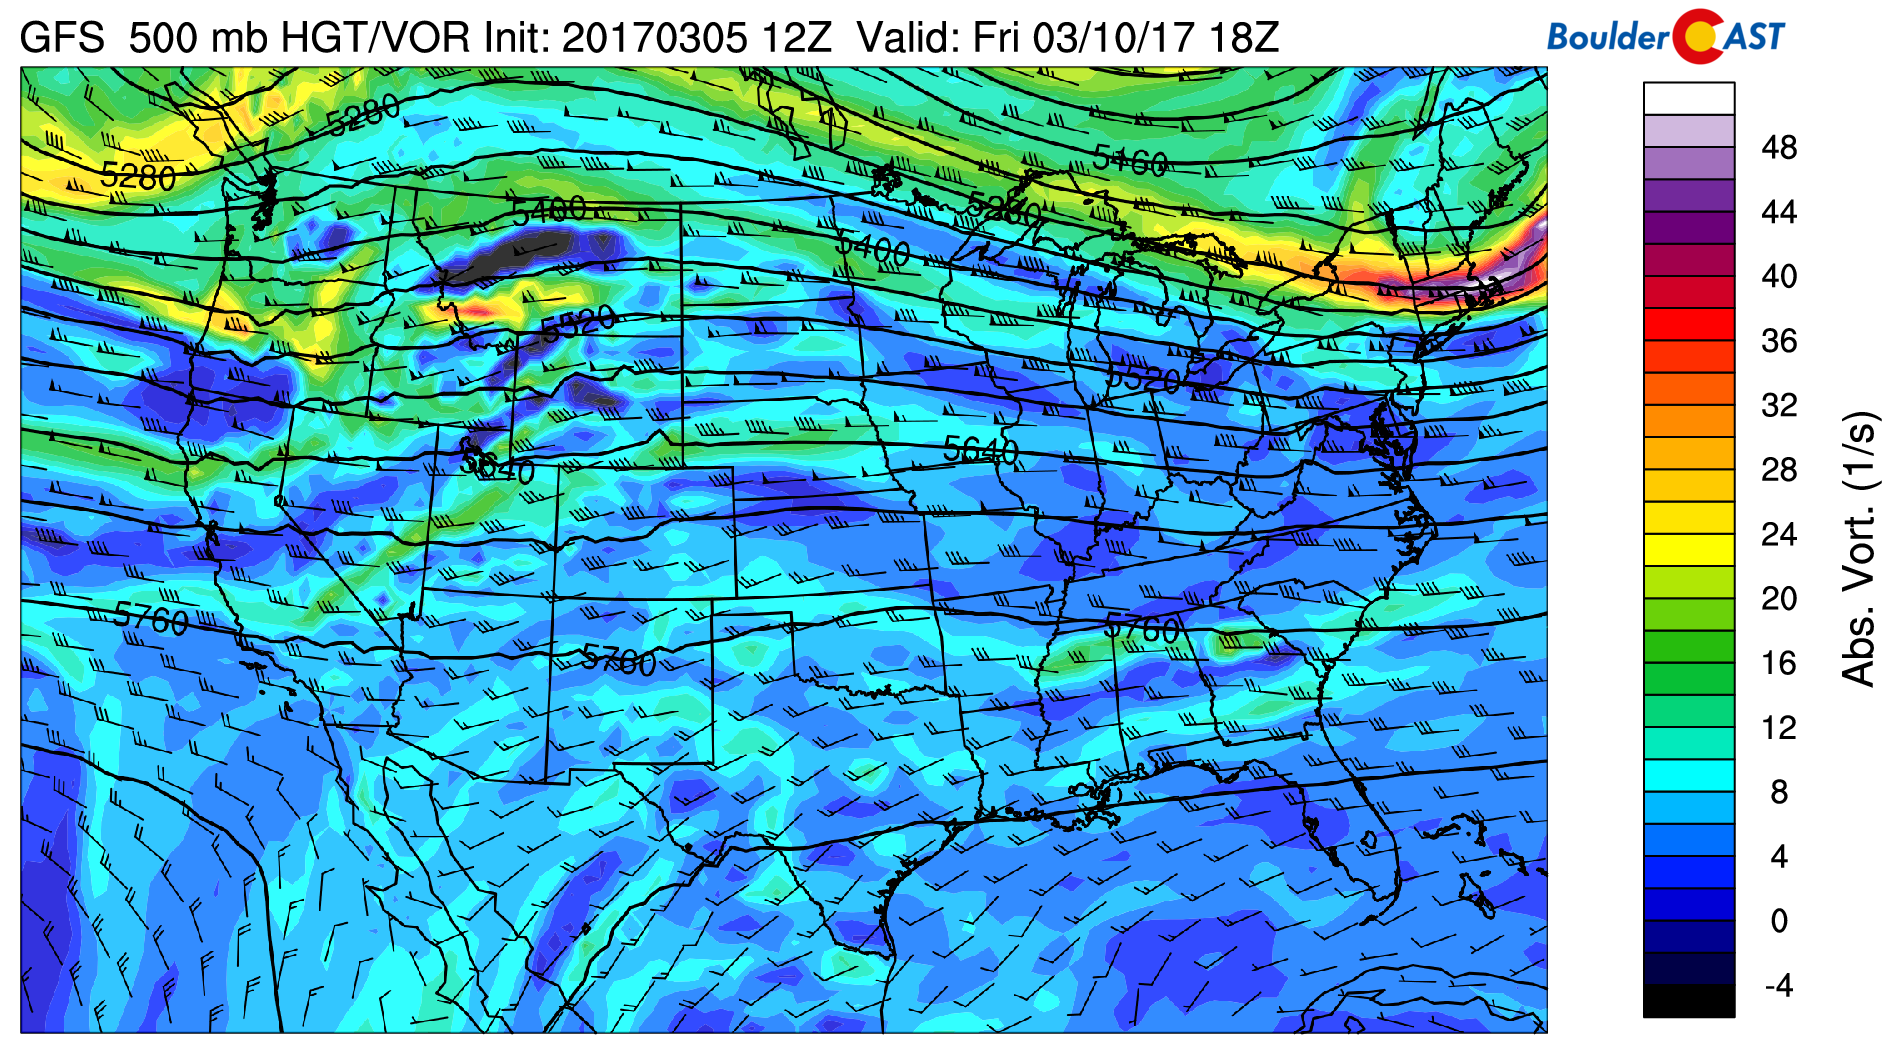 GFS 500 mb absolute vorticity for Friday